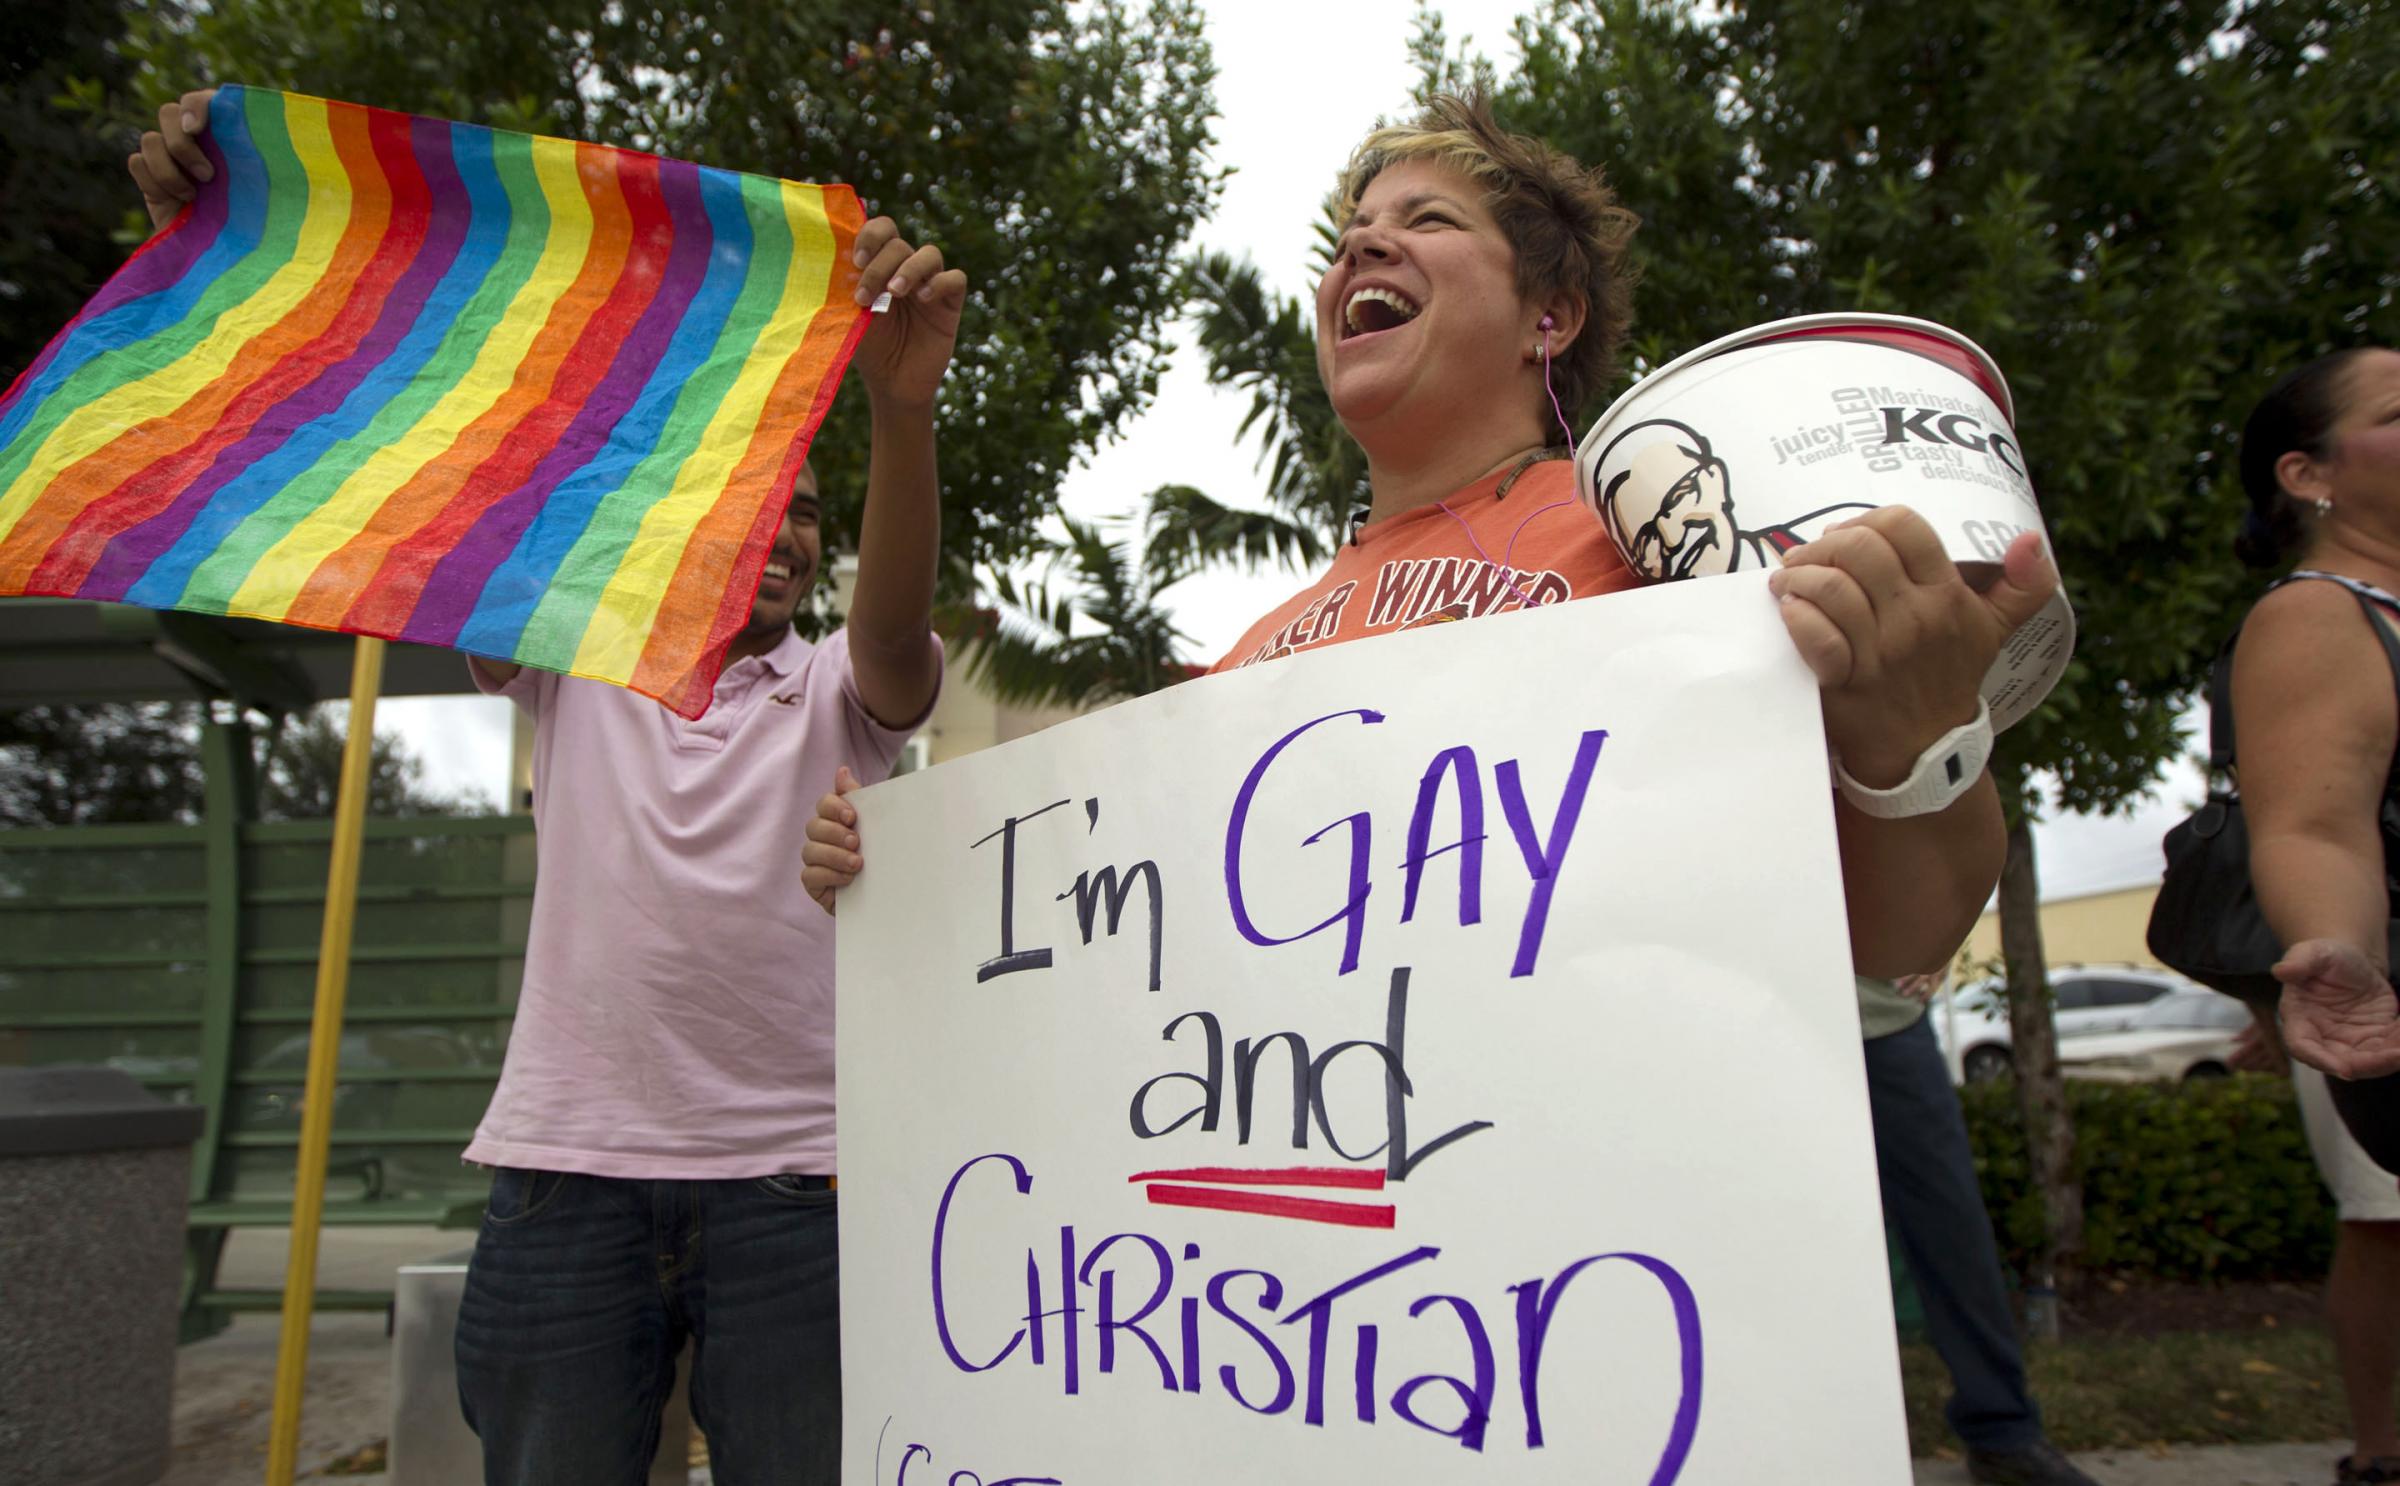 states' rights and doma clash on a shifting battlefield | kacu 89.5